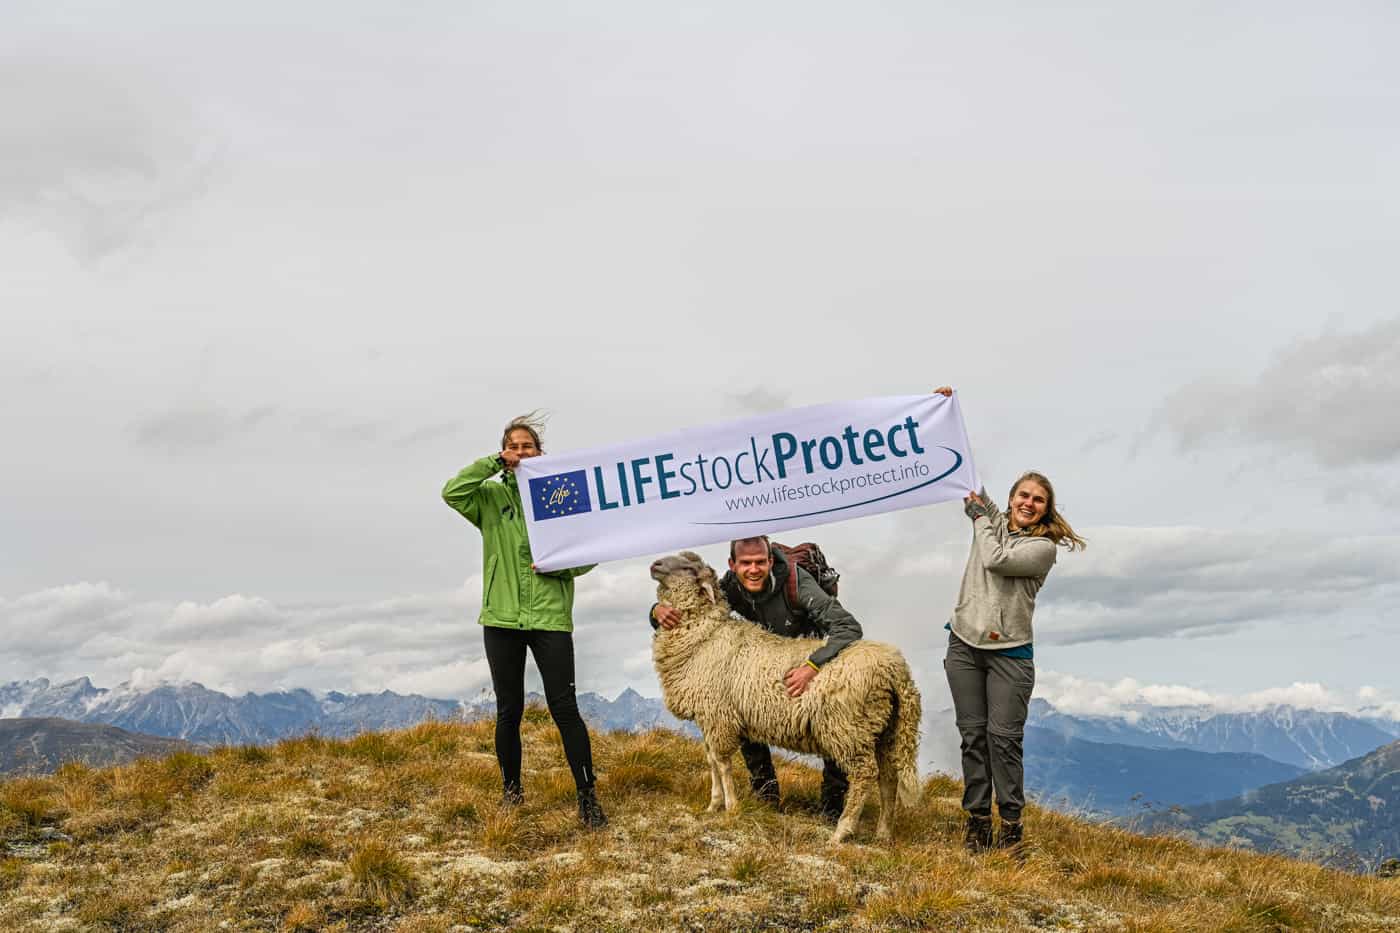 LIFEstockProtect by European Wilderness Society